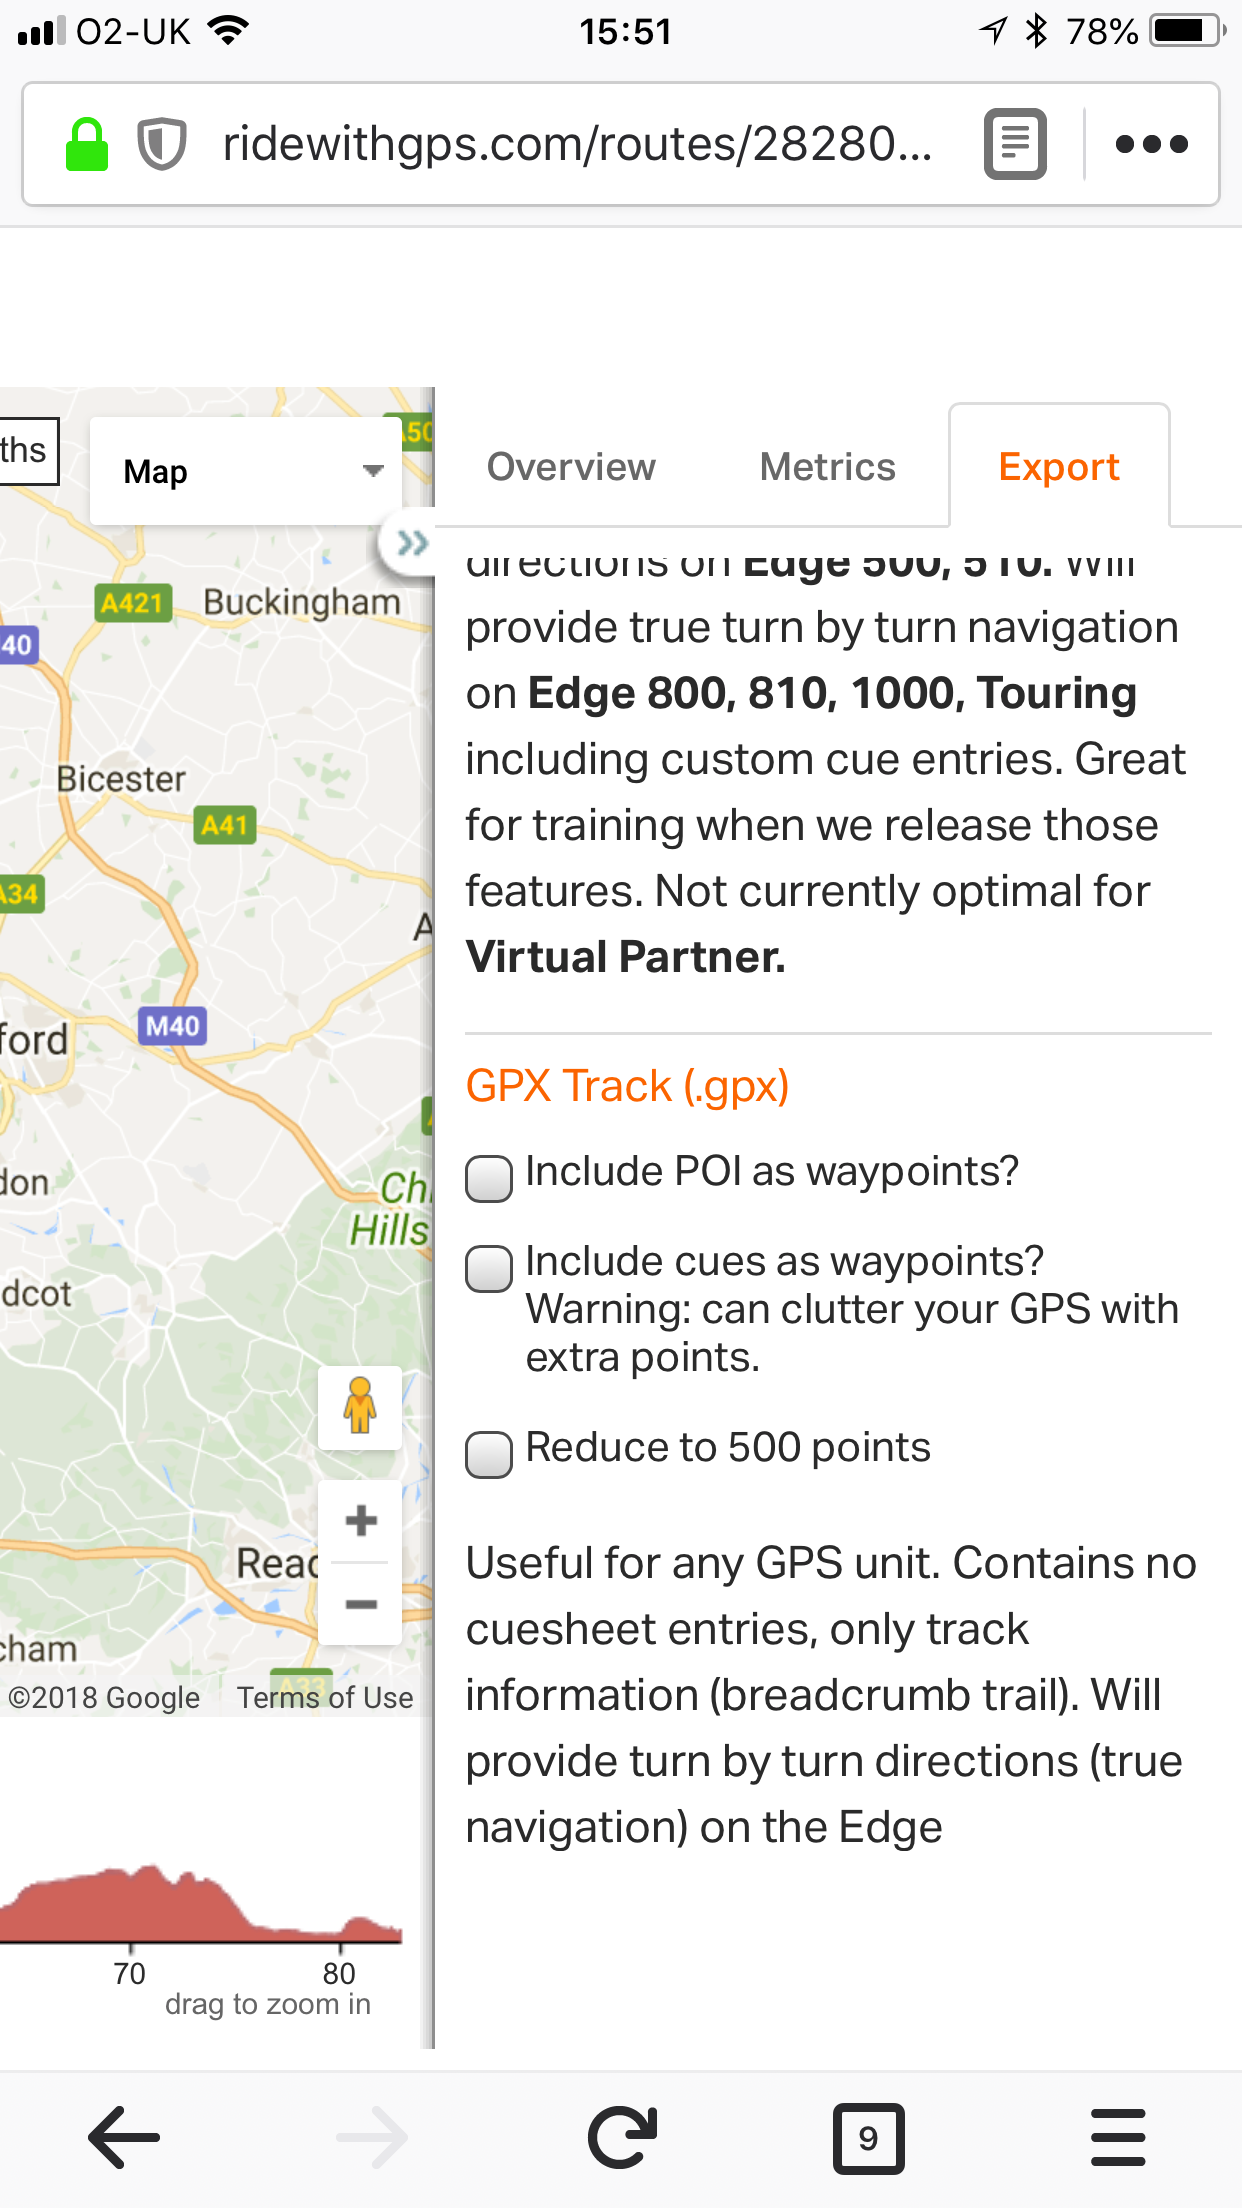 Uploading GPX track files onto the Garmin from a Mac and iPhone | by Jon Hume | Medium